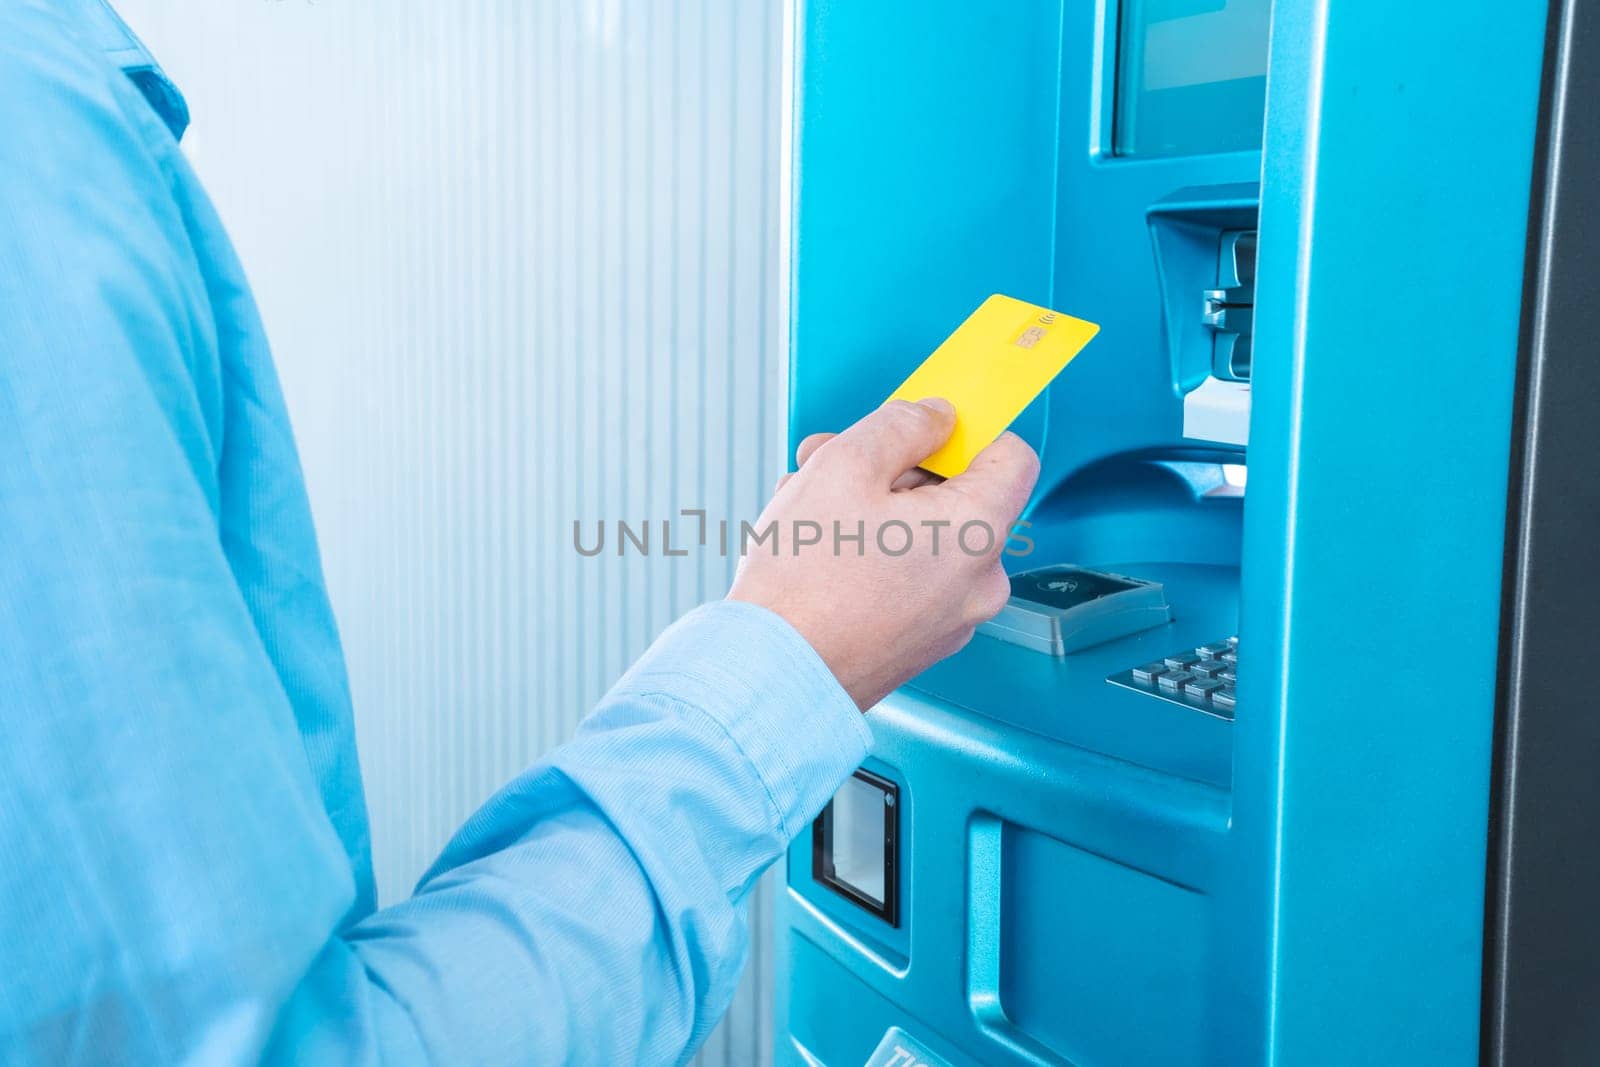 A man is inserting a blue credit card into a plastic ATM machine in a room filled with electric blue paint and fluid plastic bottles